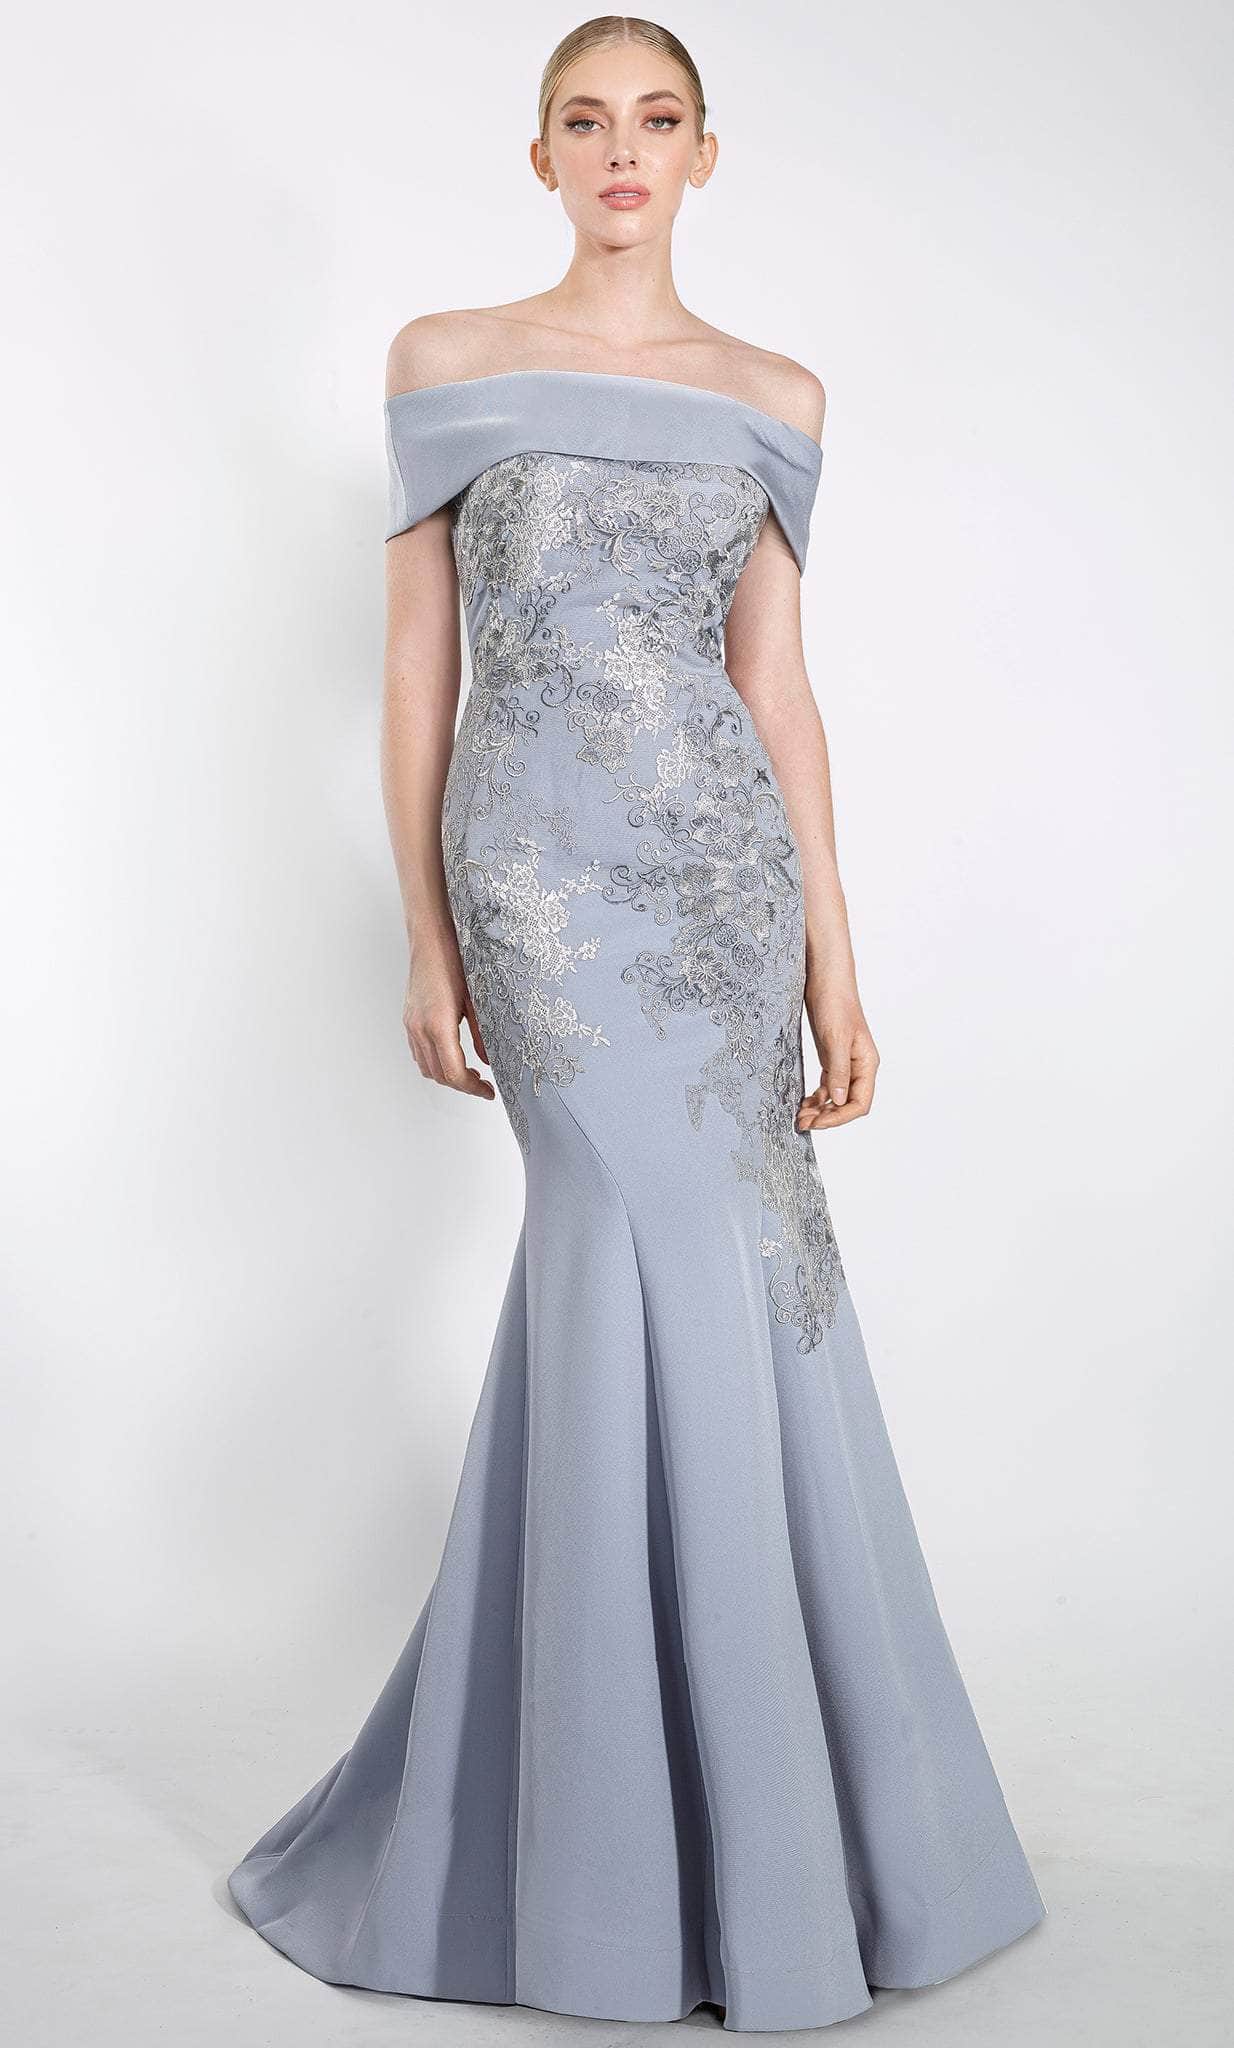 Image of Janique 2344 - Embroidered Mermaid Evening Gown